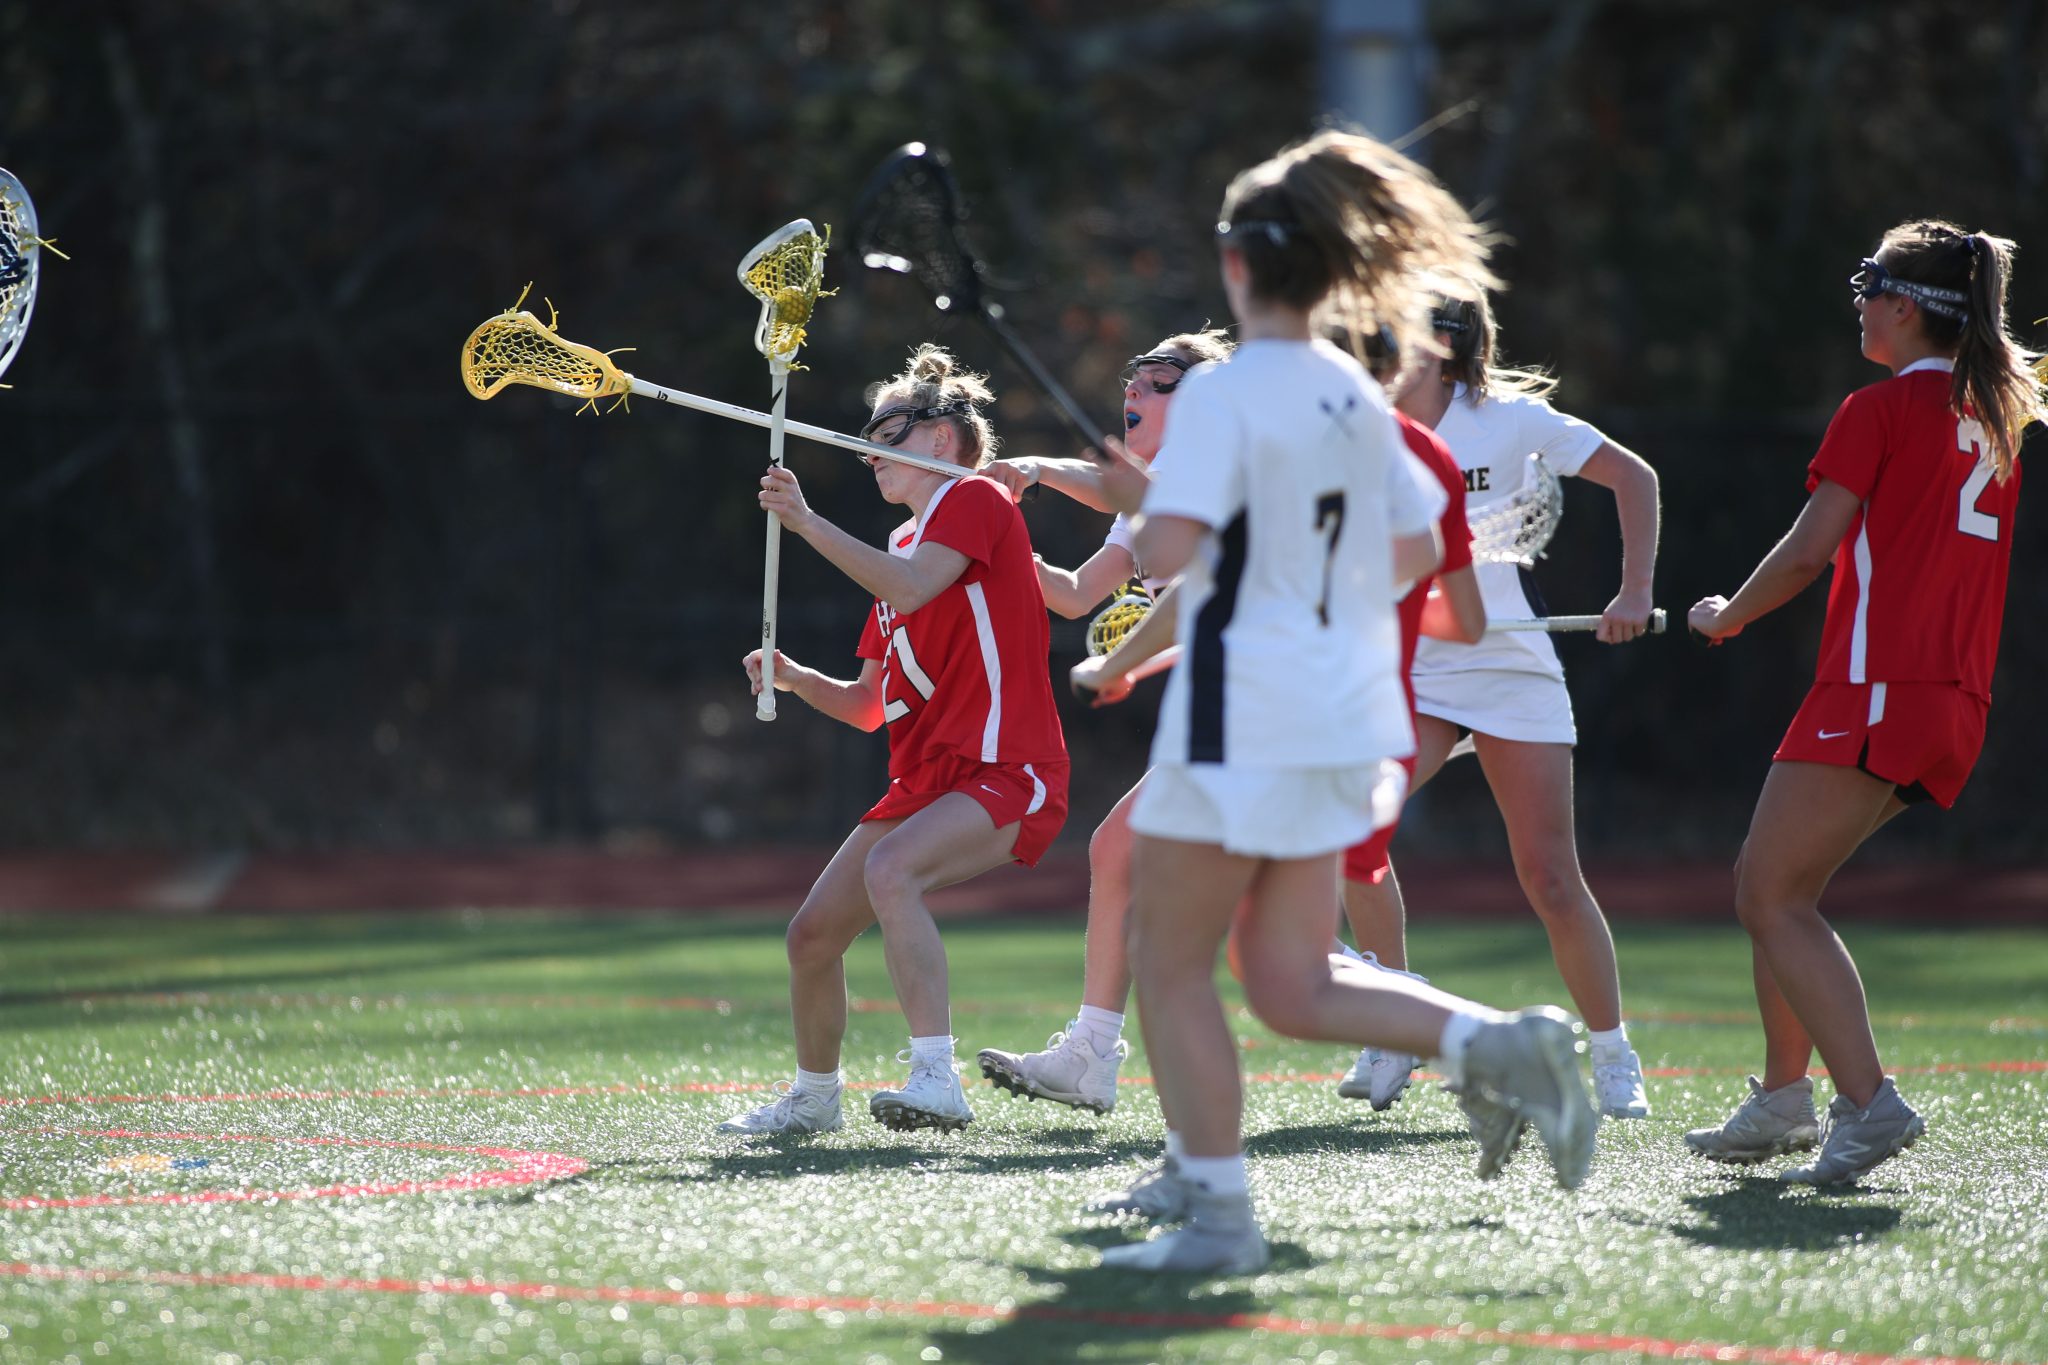 Senior captain Kenzie Wilson fights off a stick to the face and manages to score in Hingham's 17-7 loss vs NDA.